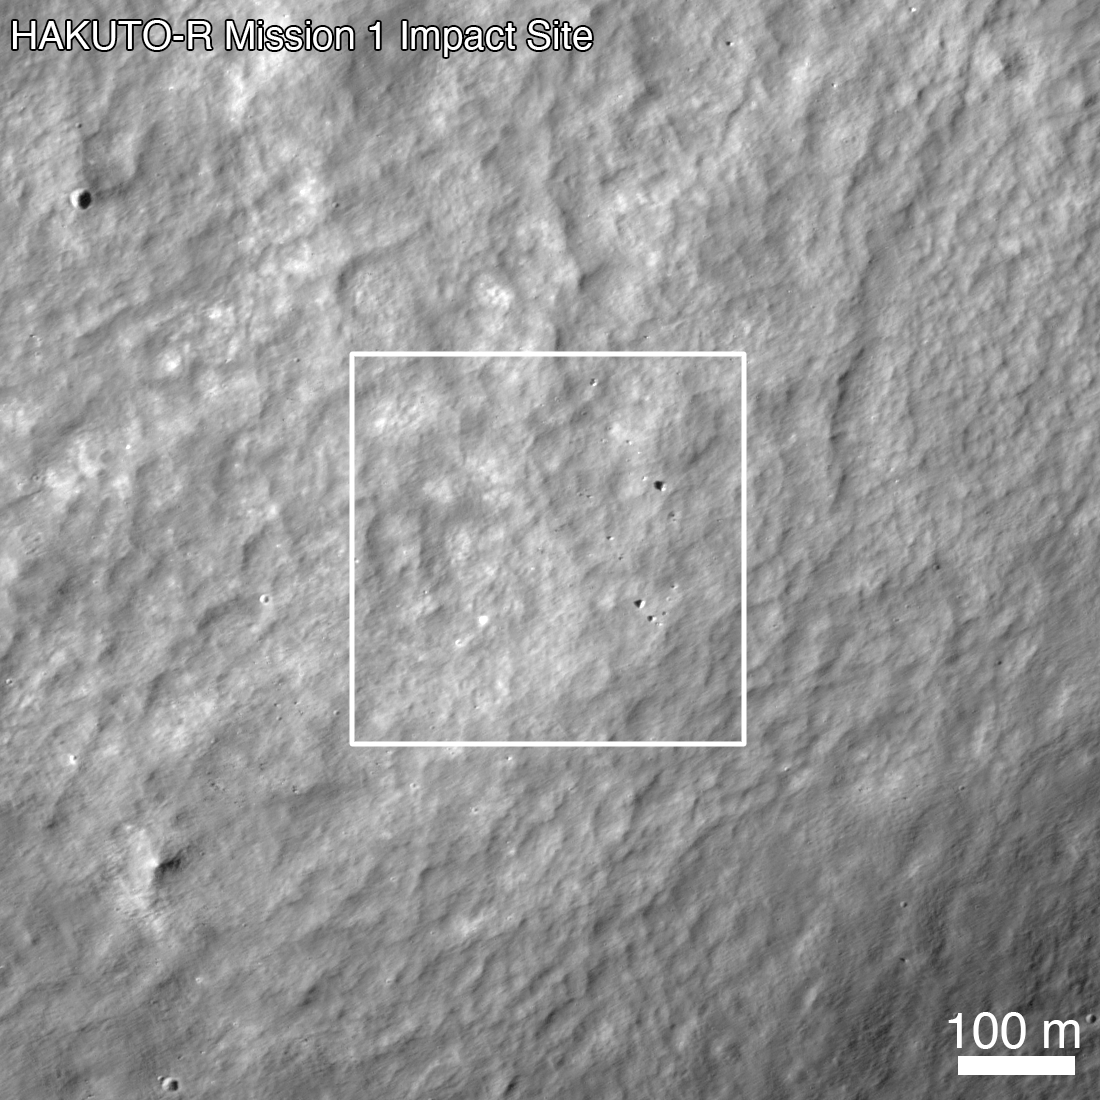   HAKUTO-R Mission 1 Lunar Lander impact site, as seen by LROC the day after the attempted landing. LROC NAC image M1437131607R [NASA/GSFC/Arizon